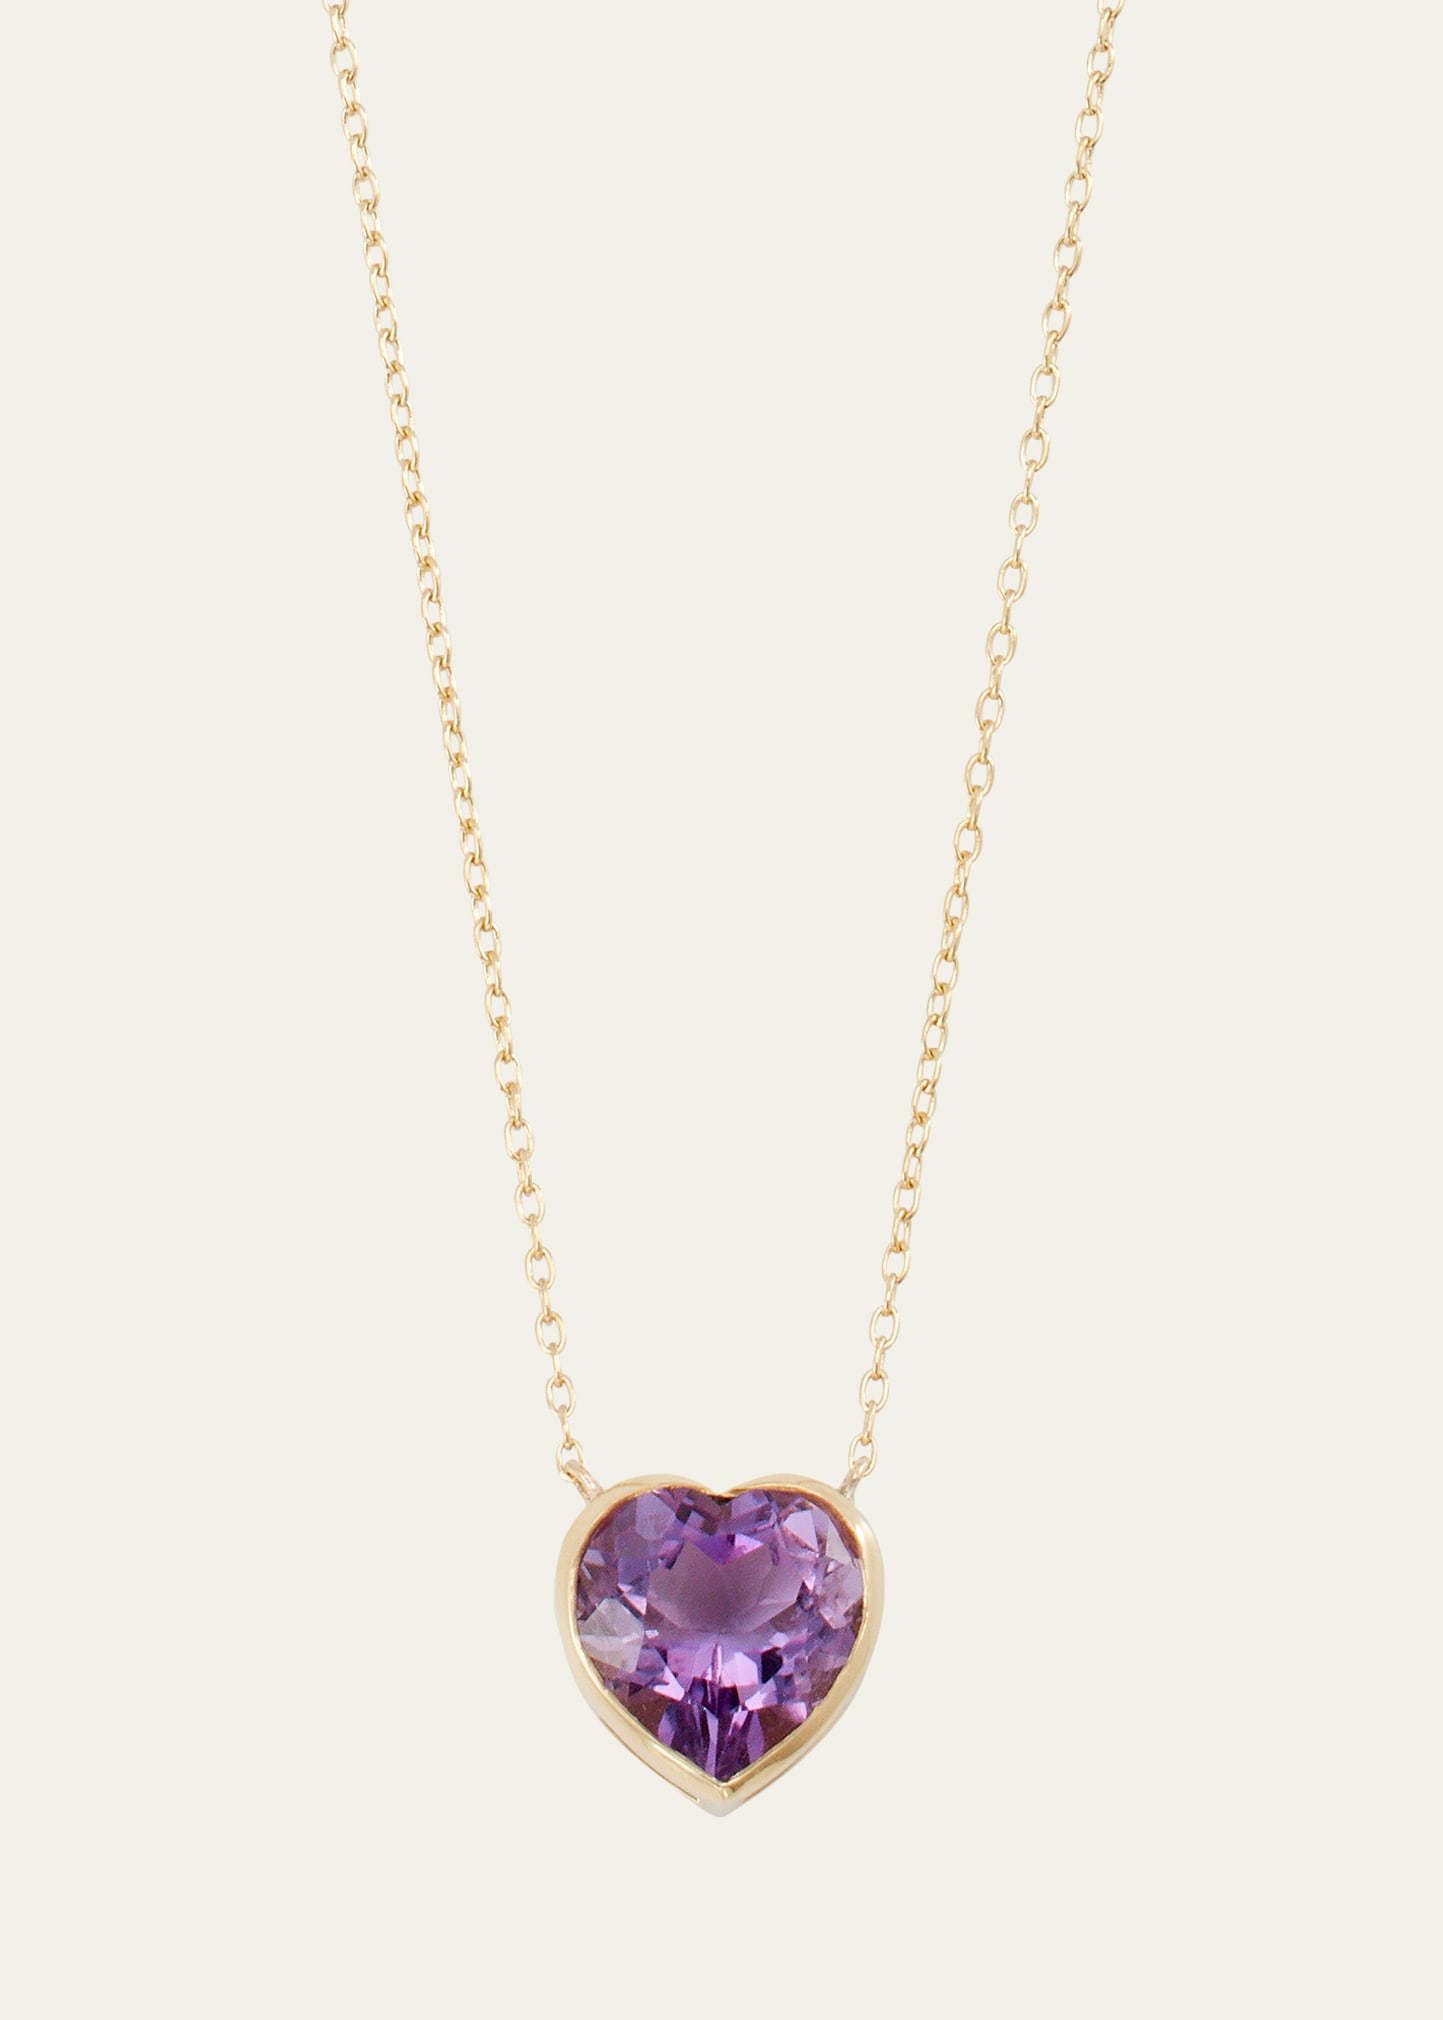 18K Yellow Gold Large Heart Necklace with Faceted Amethyst